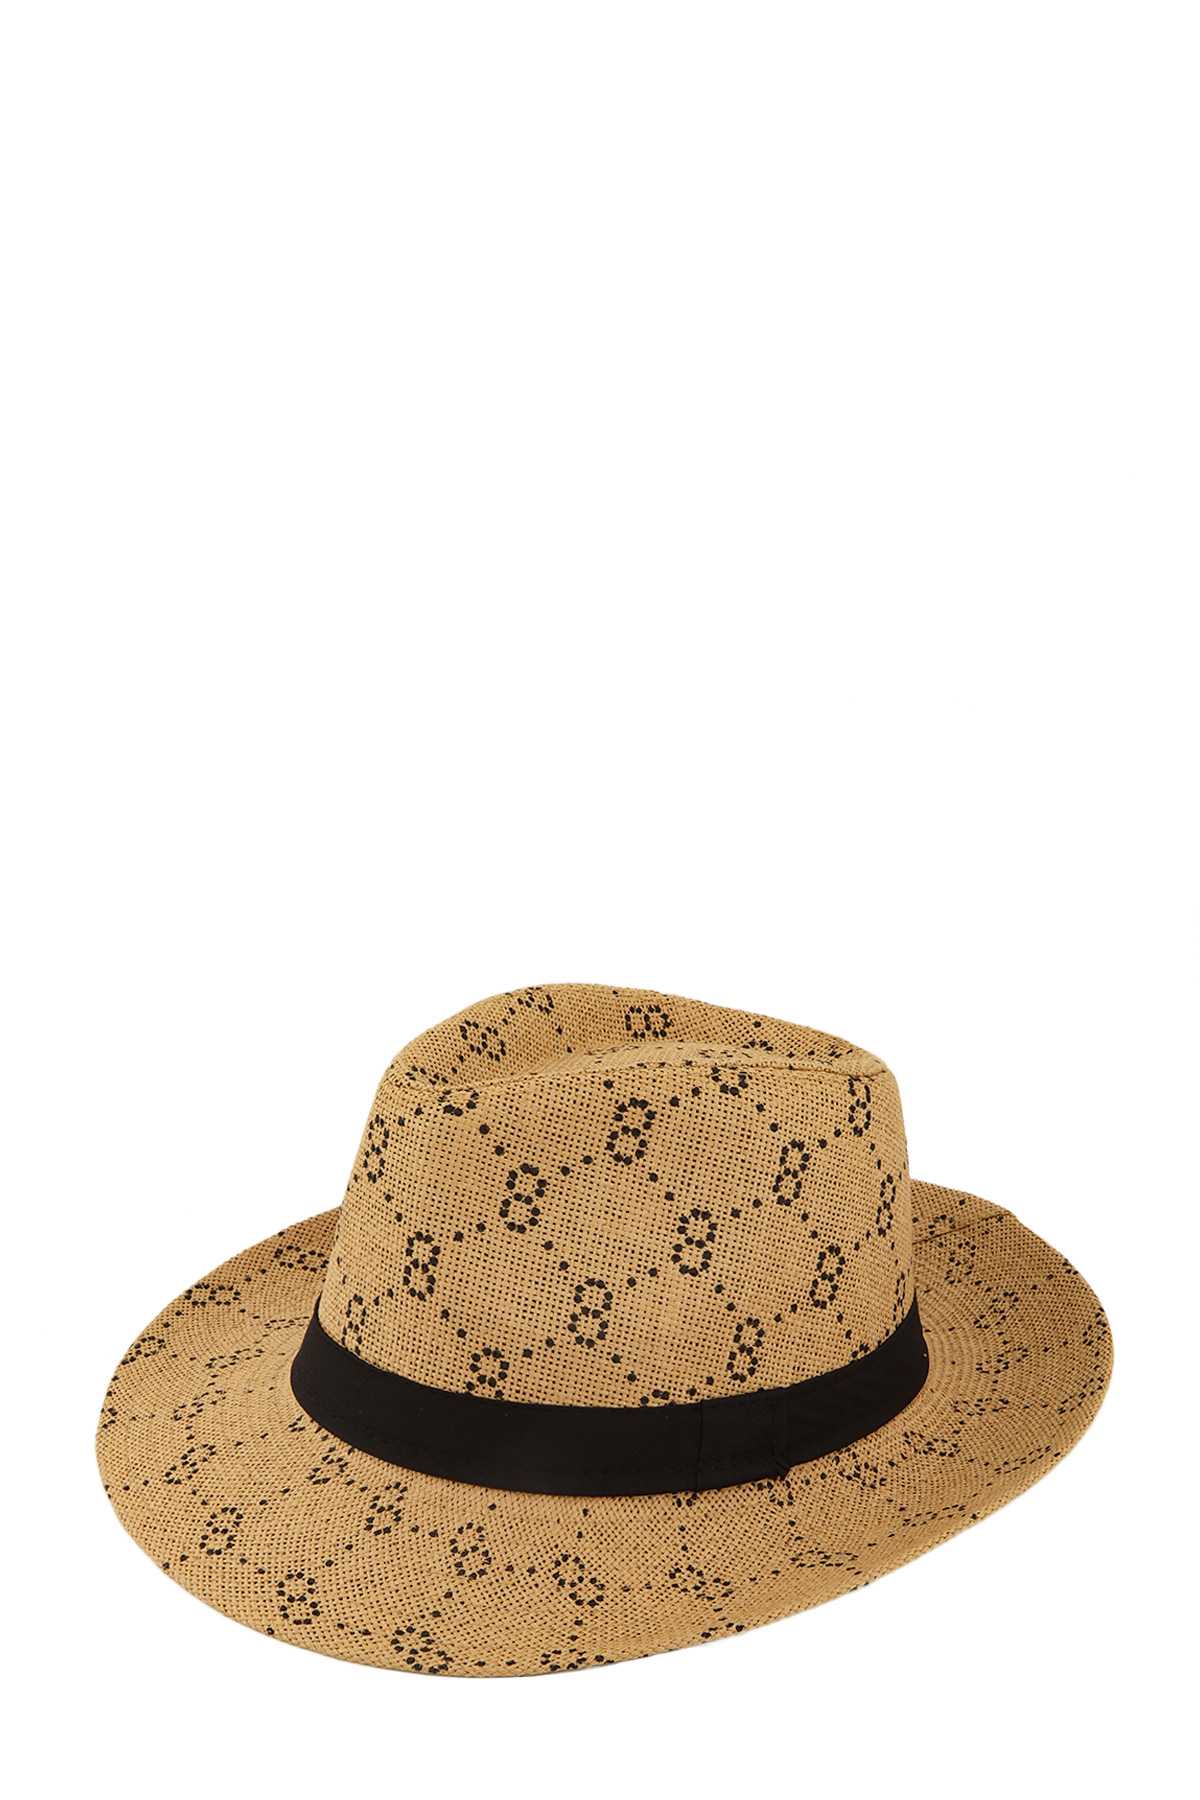 Double O and Black Band Fedora Straw Hat